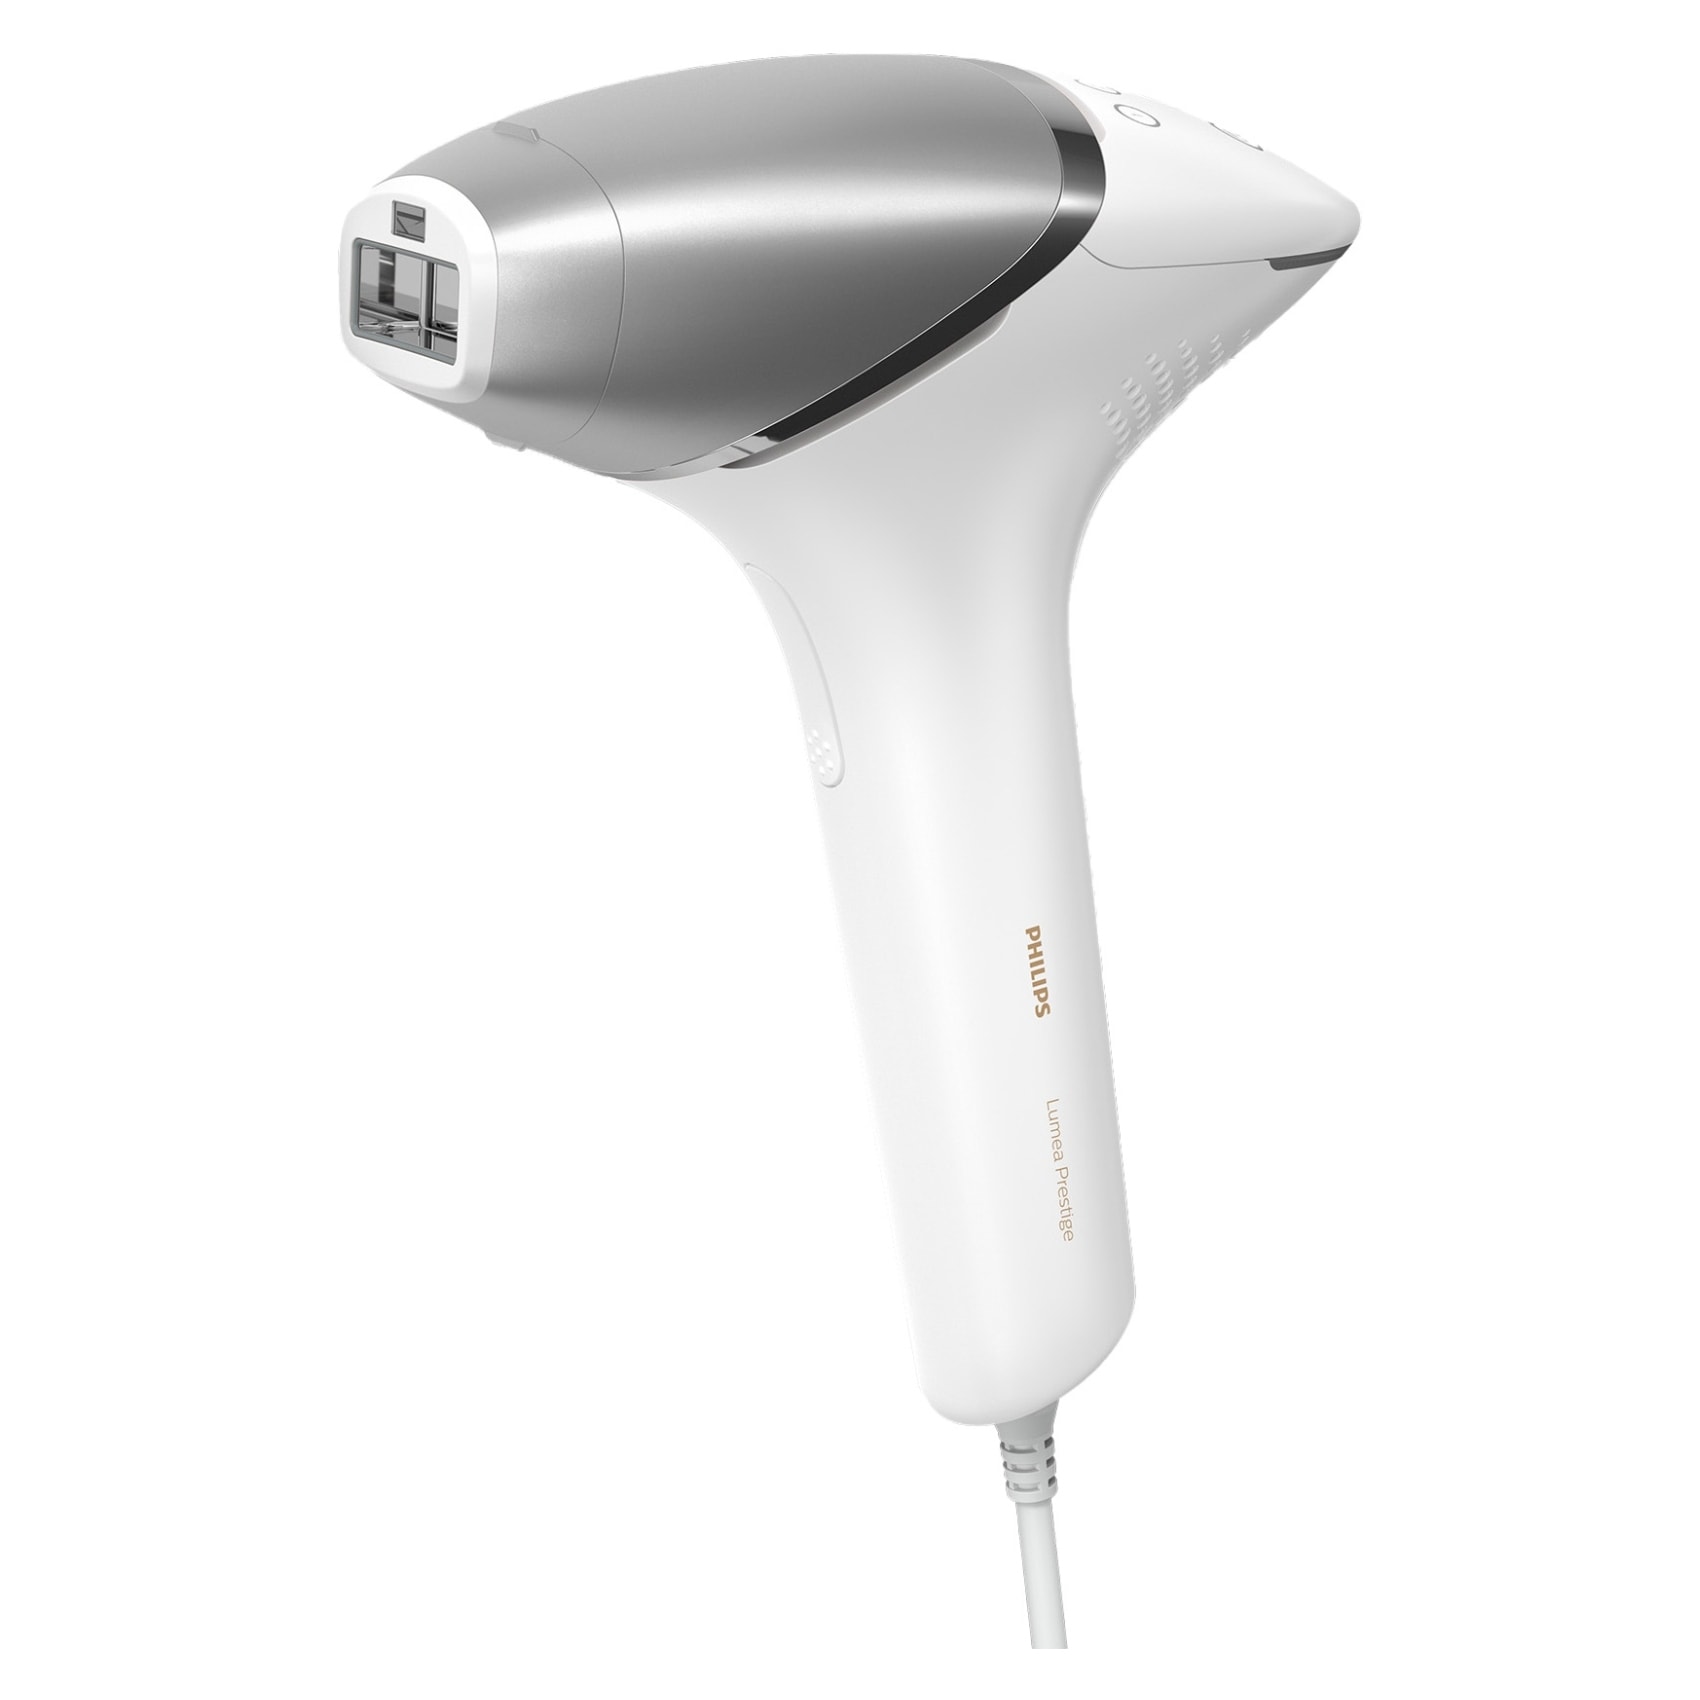 Buy Braun Silk-Expert Pro 5 IPL Hair Removal Kit PL5147 Multicolour Online  - Shop Beauty & Personal Care on Carrefour UAE